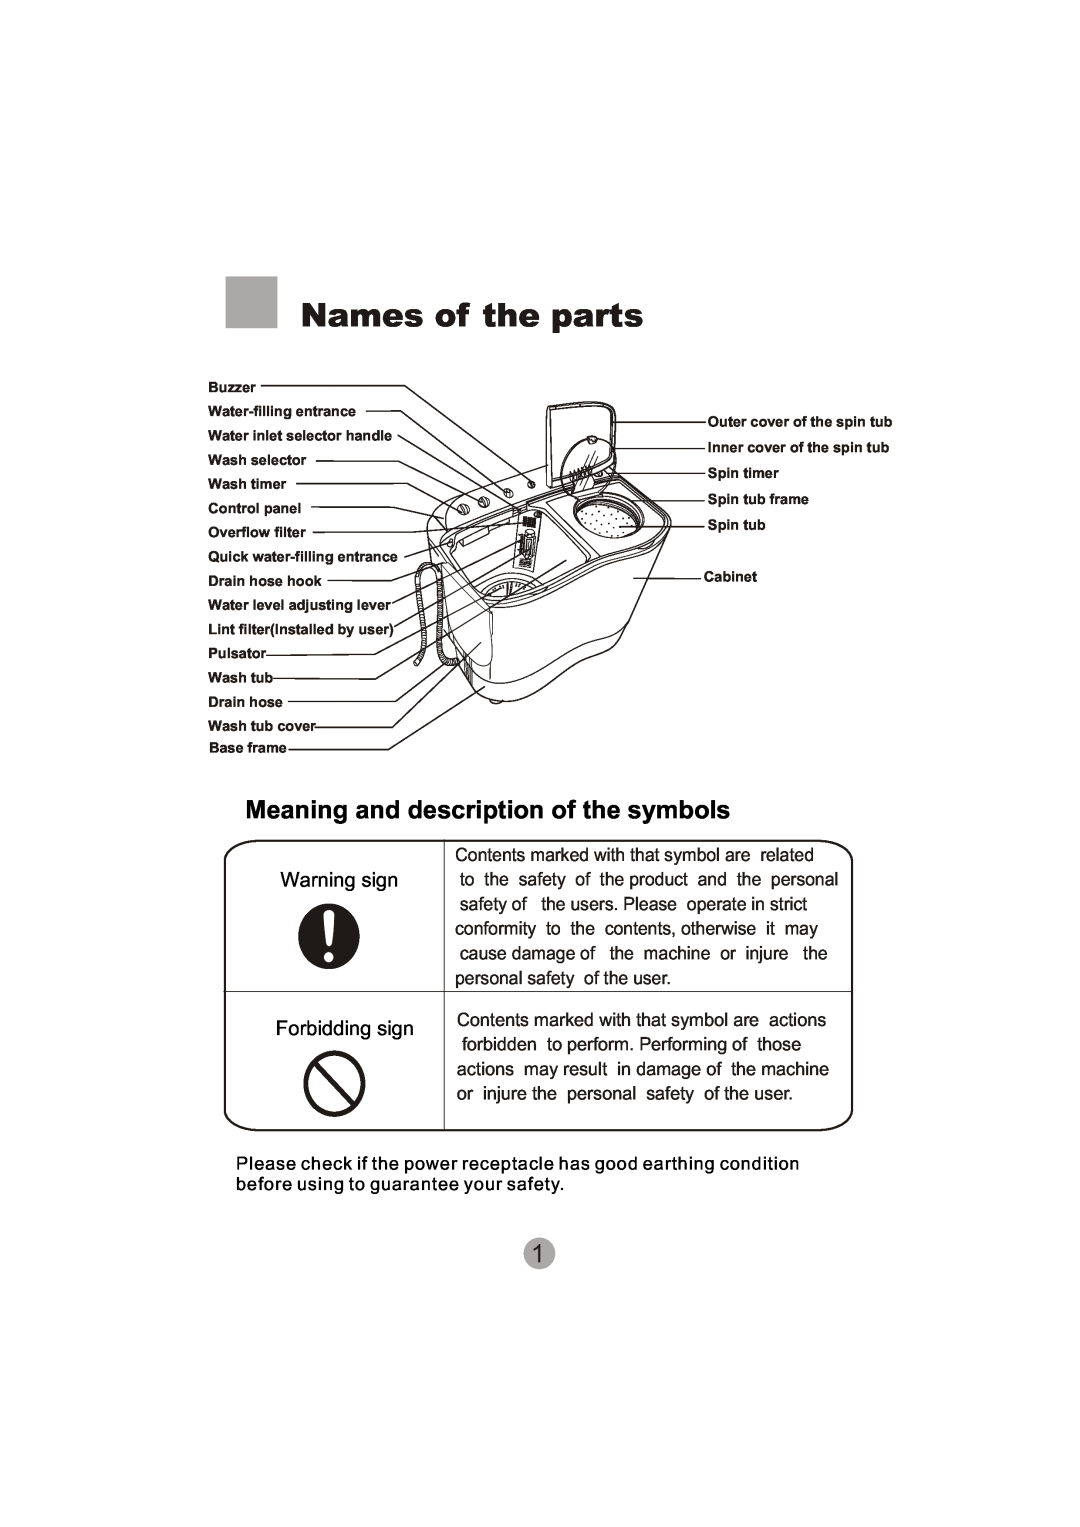 Haier XPB60-113S user manual Names of the parts, Meaning and description of the symbols, Warning sign, Forbidding sign 